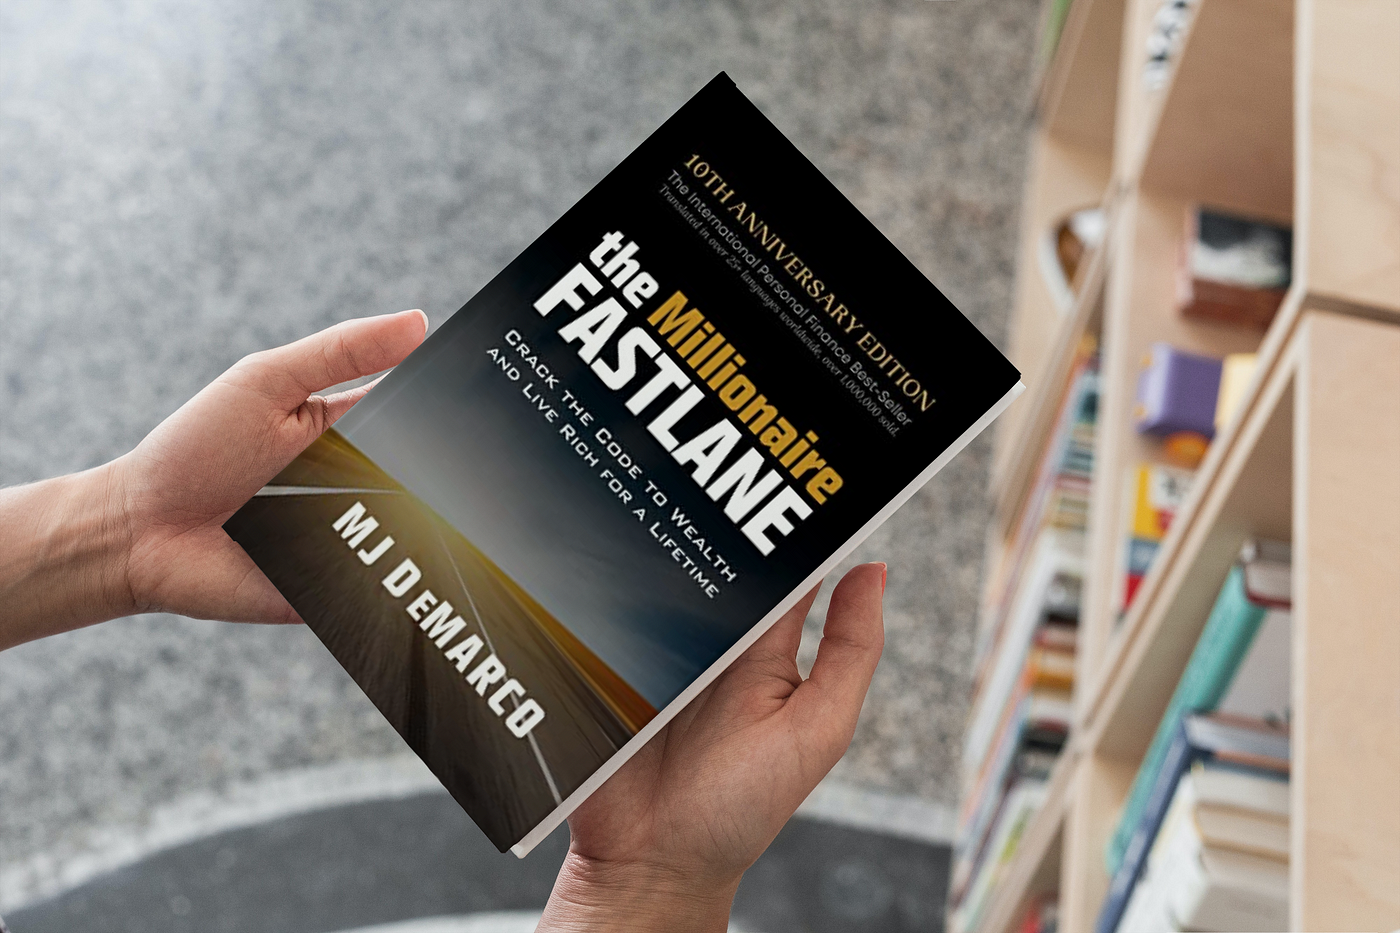 7 Lessons I Learned from the Book “The Millionaire Fastlane”